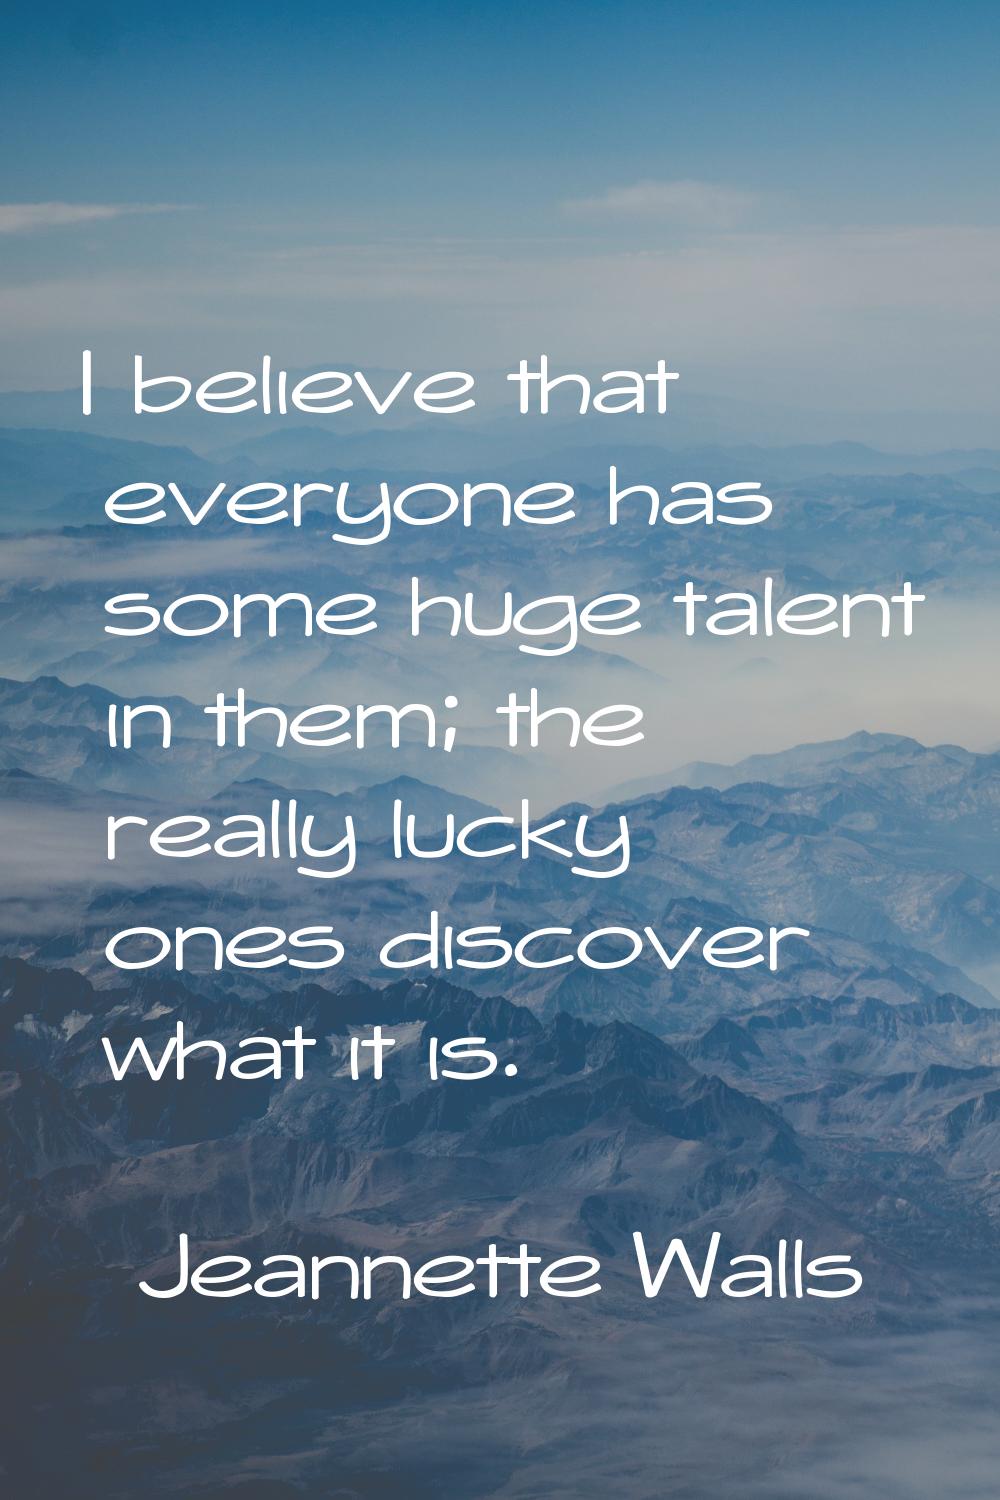 I believe that everyone has some huge talent in them; the really lucky ones discover what it is.